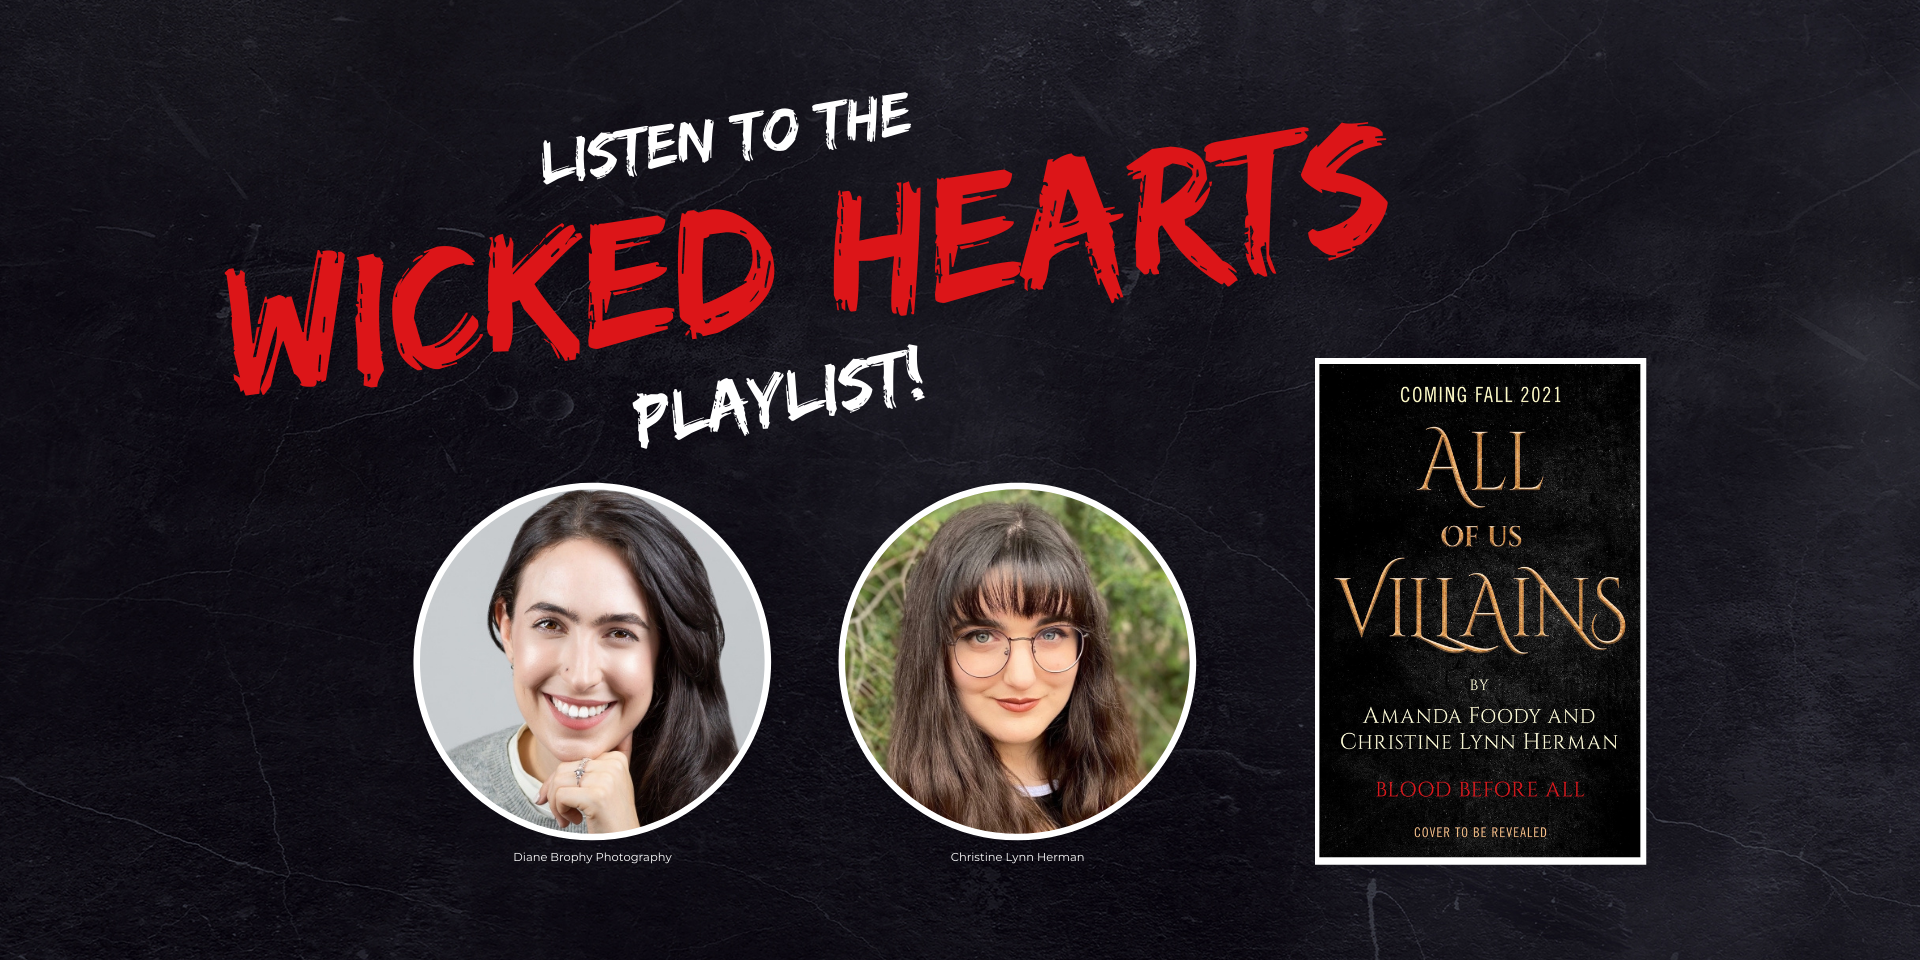 Celebrate Villaintine’s Day with the <i>All of Us Villains</i> Wicked Hearts Playlist!